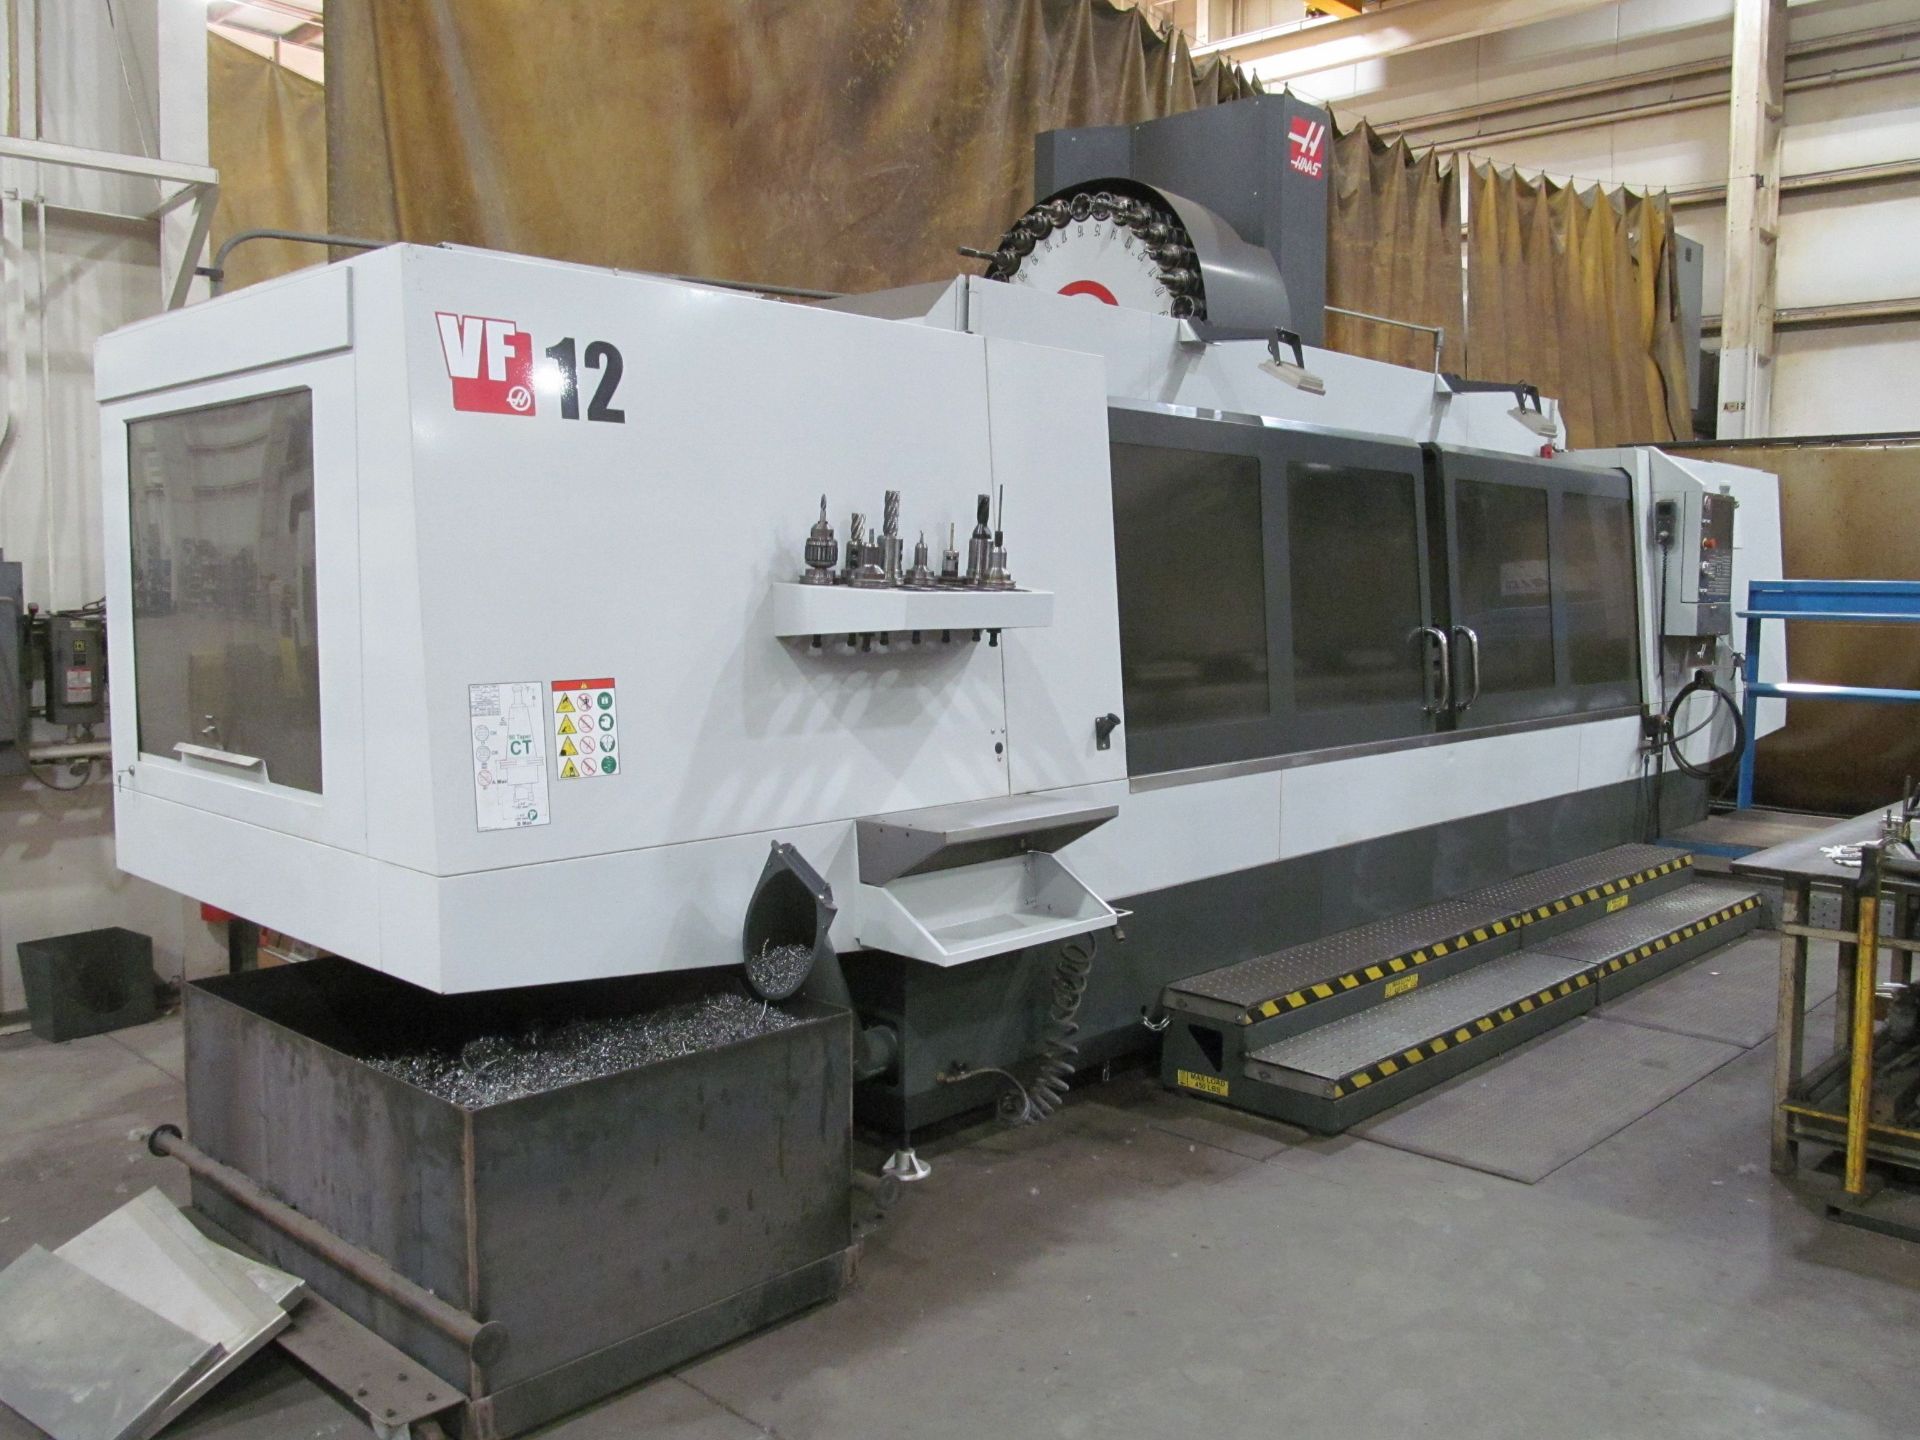 Haas 3-Axis Model VF-12/50 CNC Vertical Machining Center, S/N: 1135485 (2017); with Haas CNC